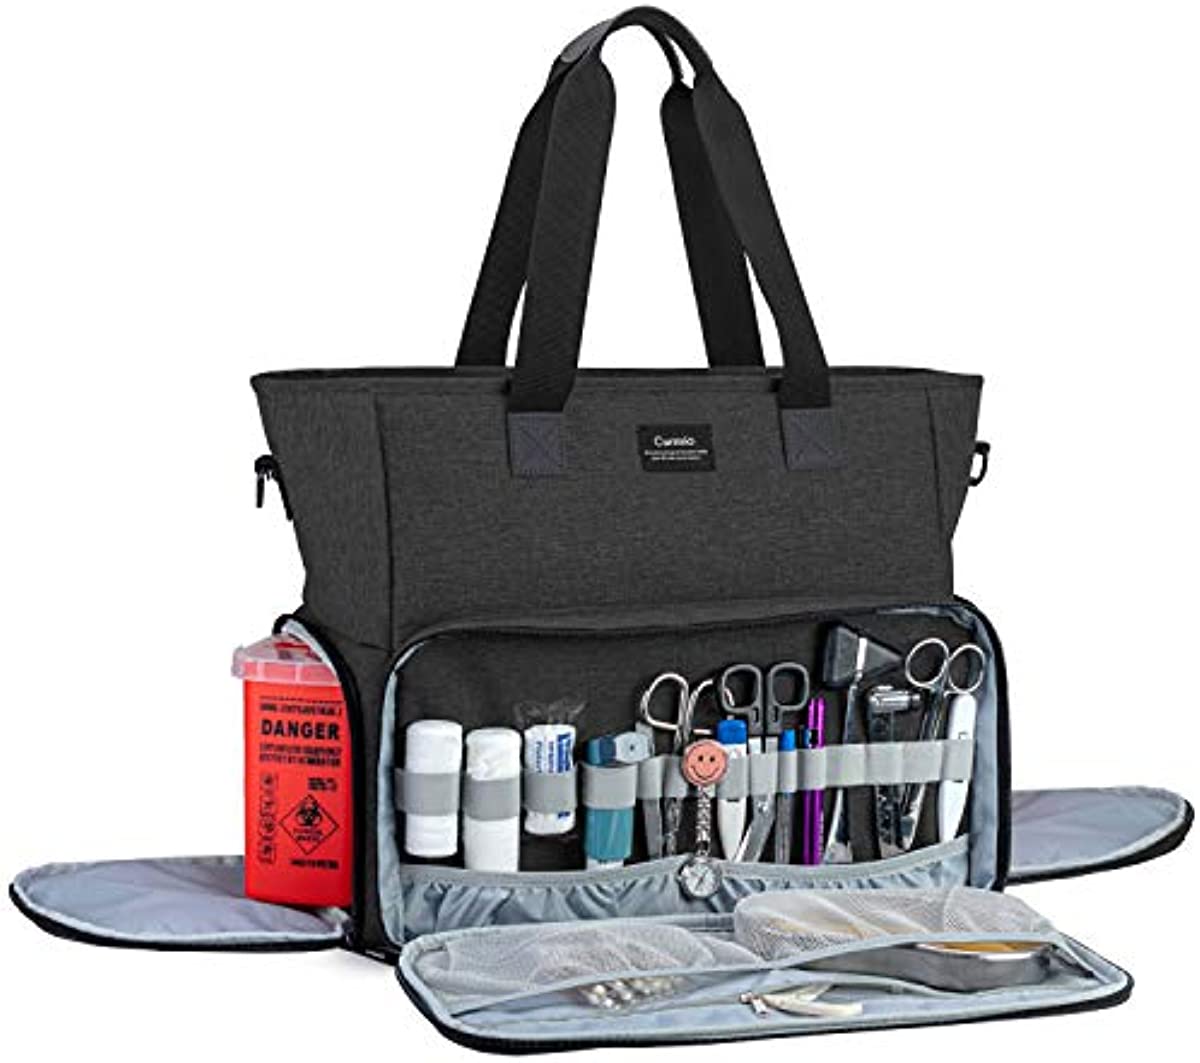 CURMIO Nurse Bag and Tote for Work, Nursing Clinical Bag with Padded Laptop Sleeve for Home Visits, Health Care, Hospice, Bag ONLY, Black (Patent Pending)